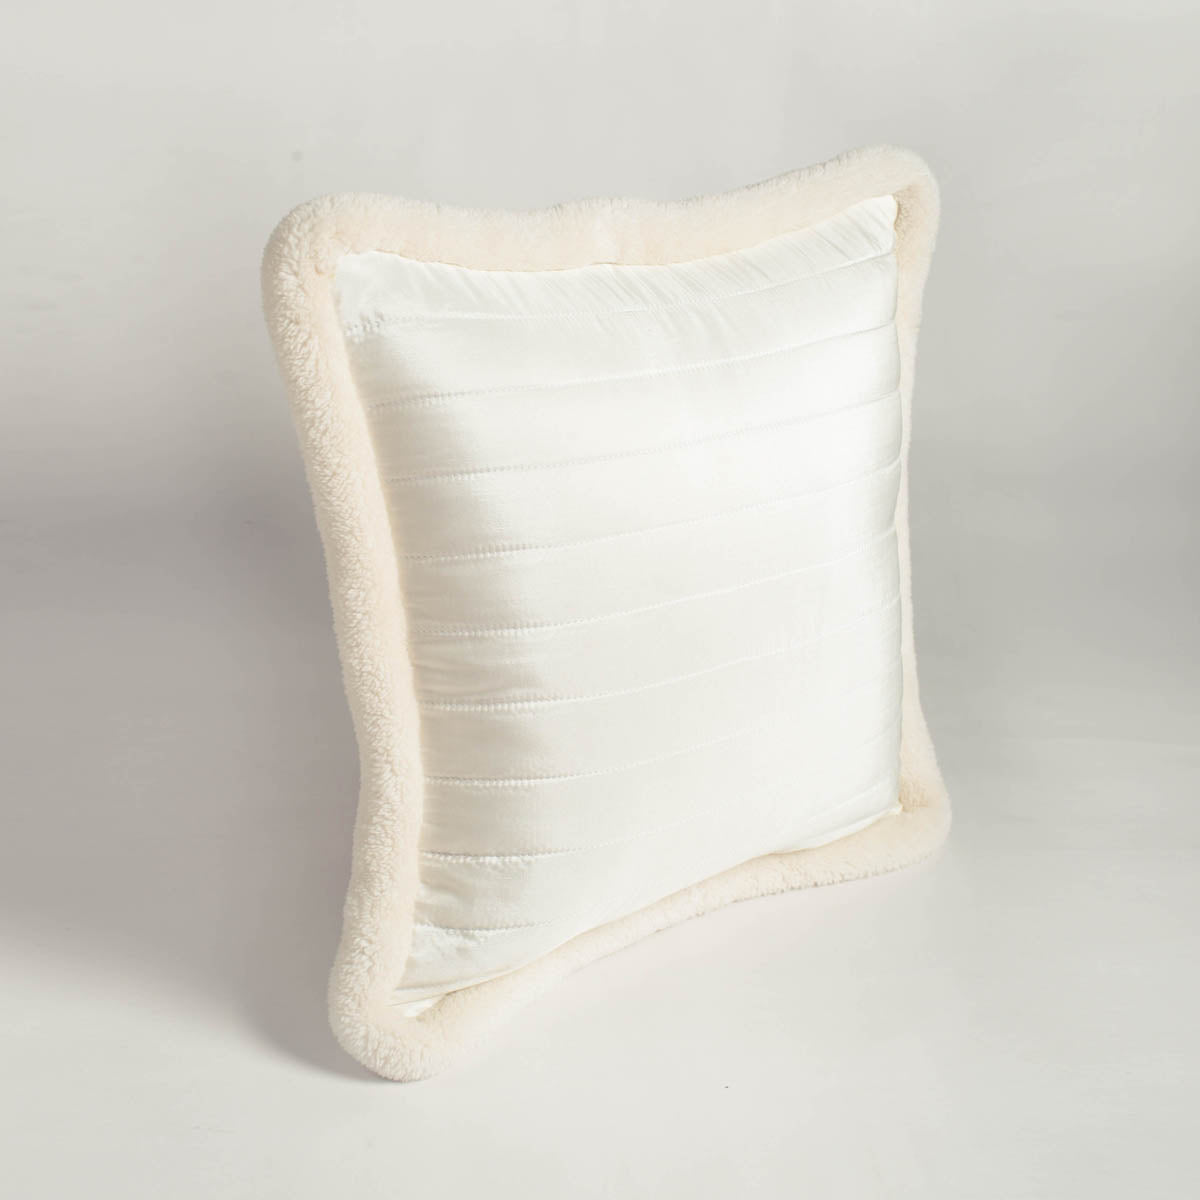 Svenska - White cushion cover, quilted, faux silk pillow